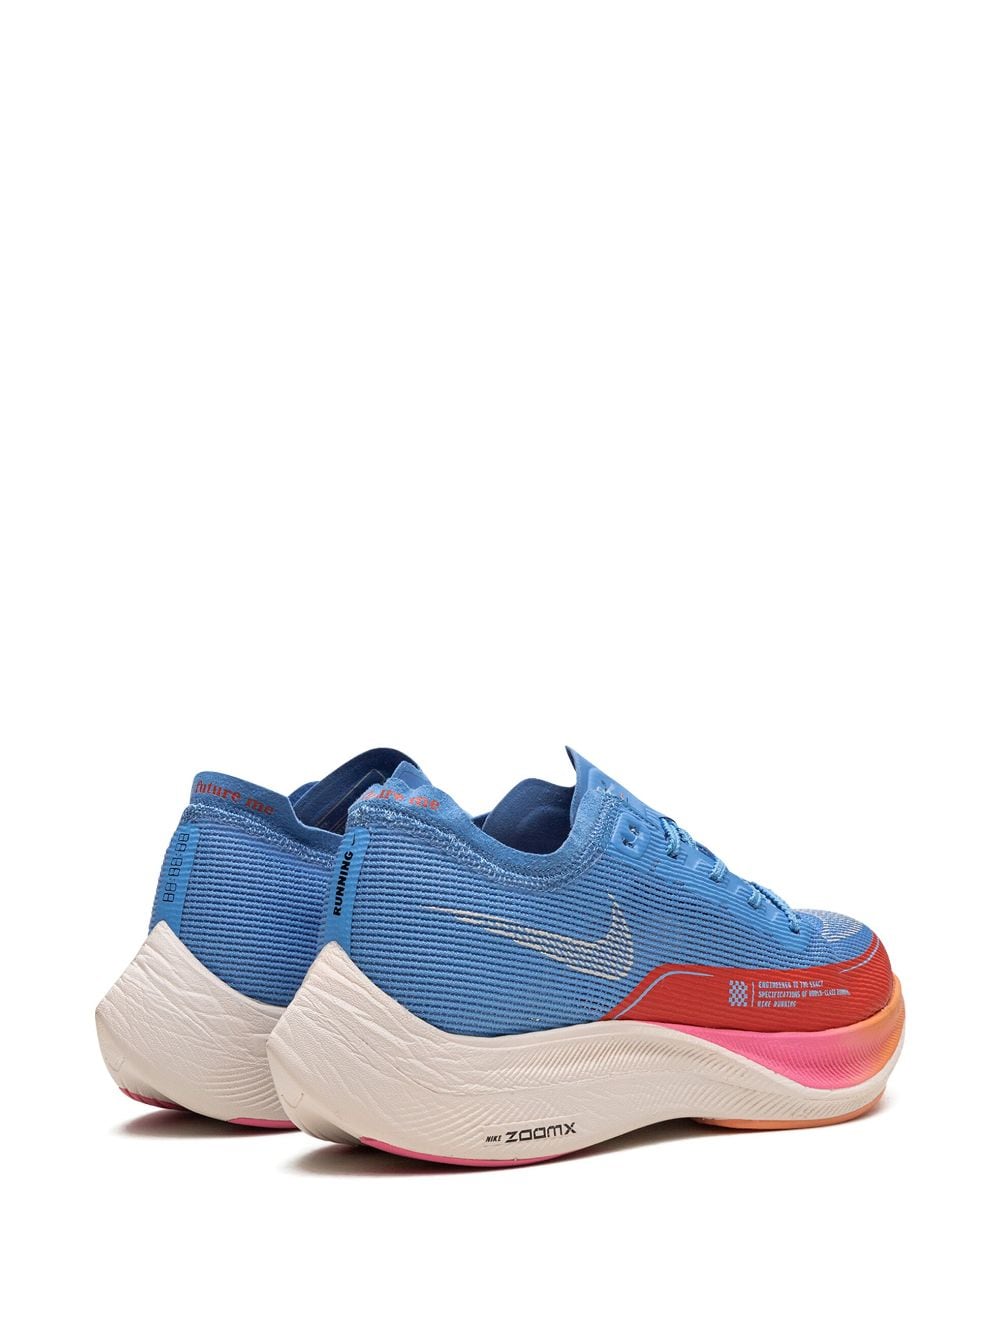 Shop Nike Zoomx Vaporfly Next% 2 "for Future Me" Sneakers In Blue